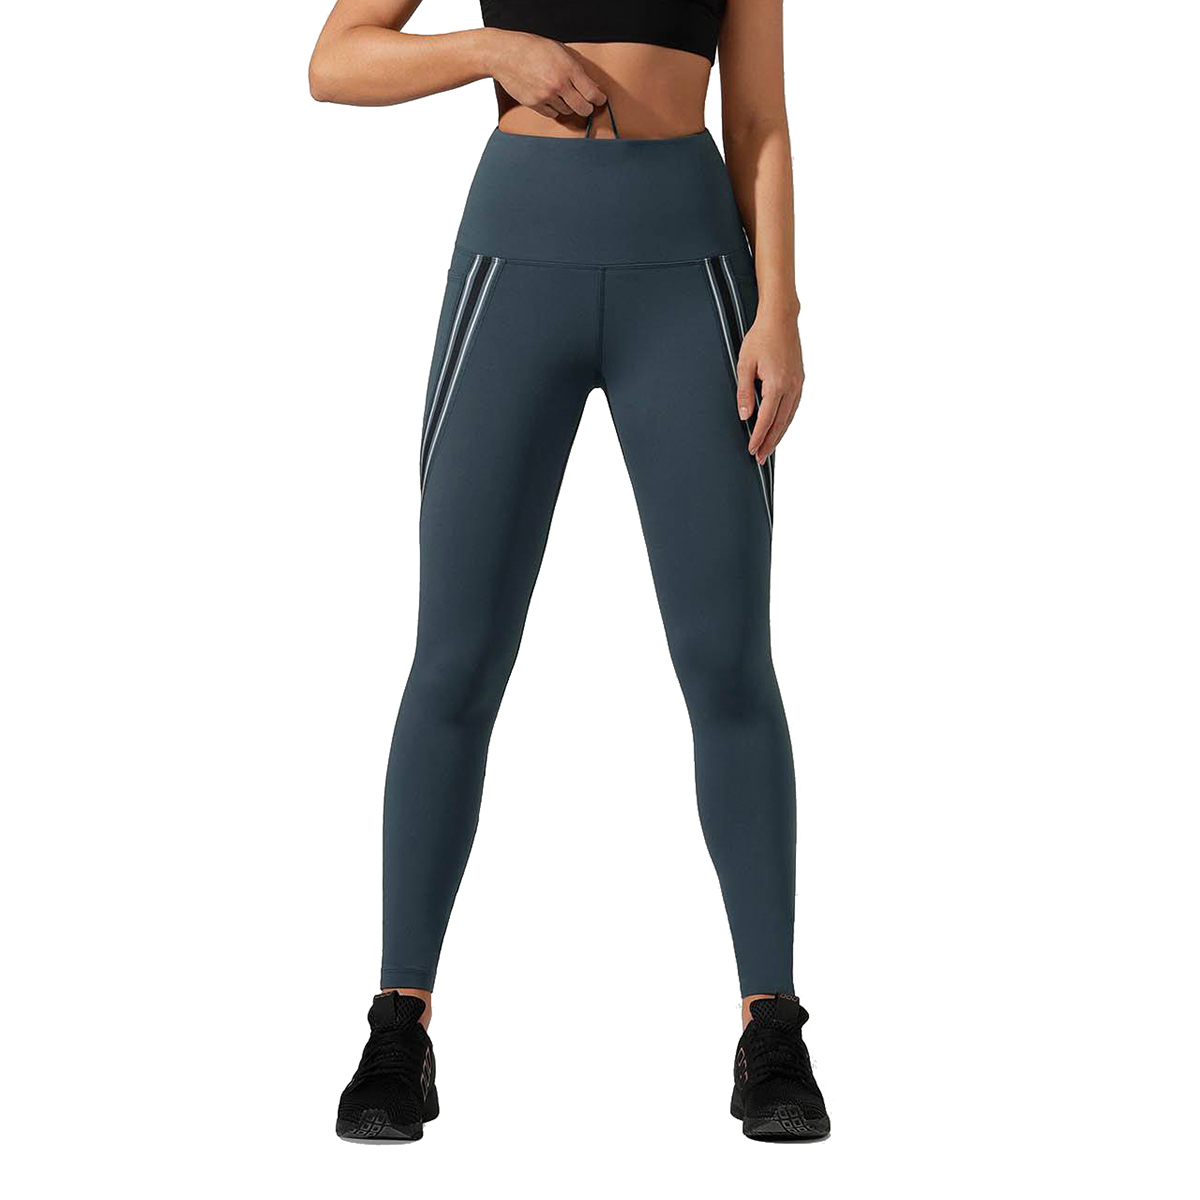 Lorna Jane Athletic Core Full Length Tight, , large image number null